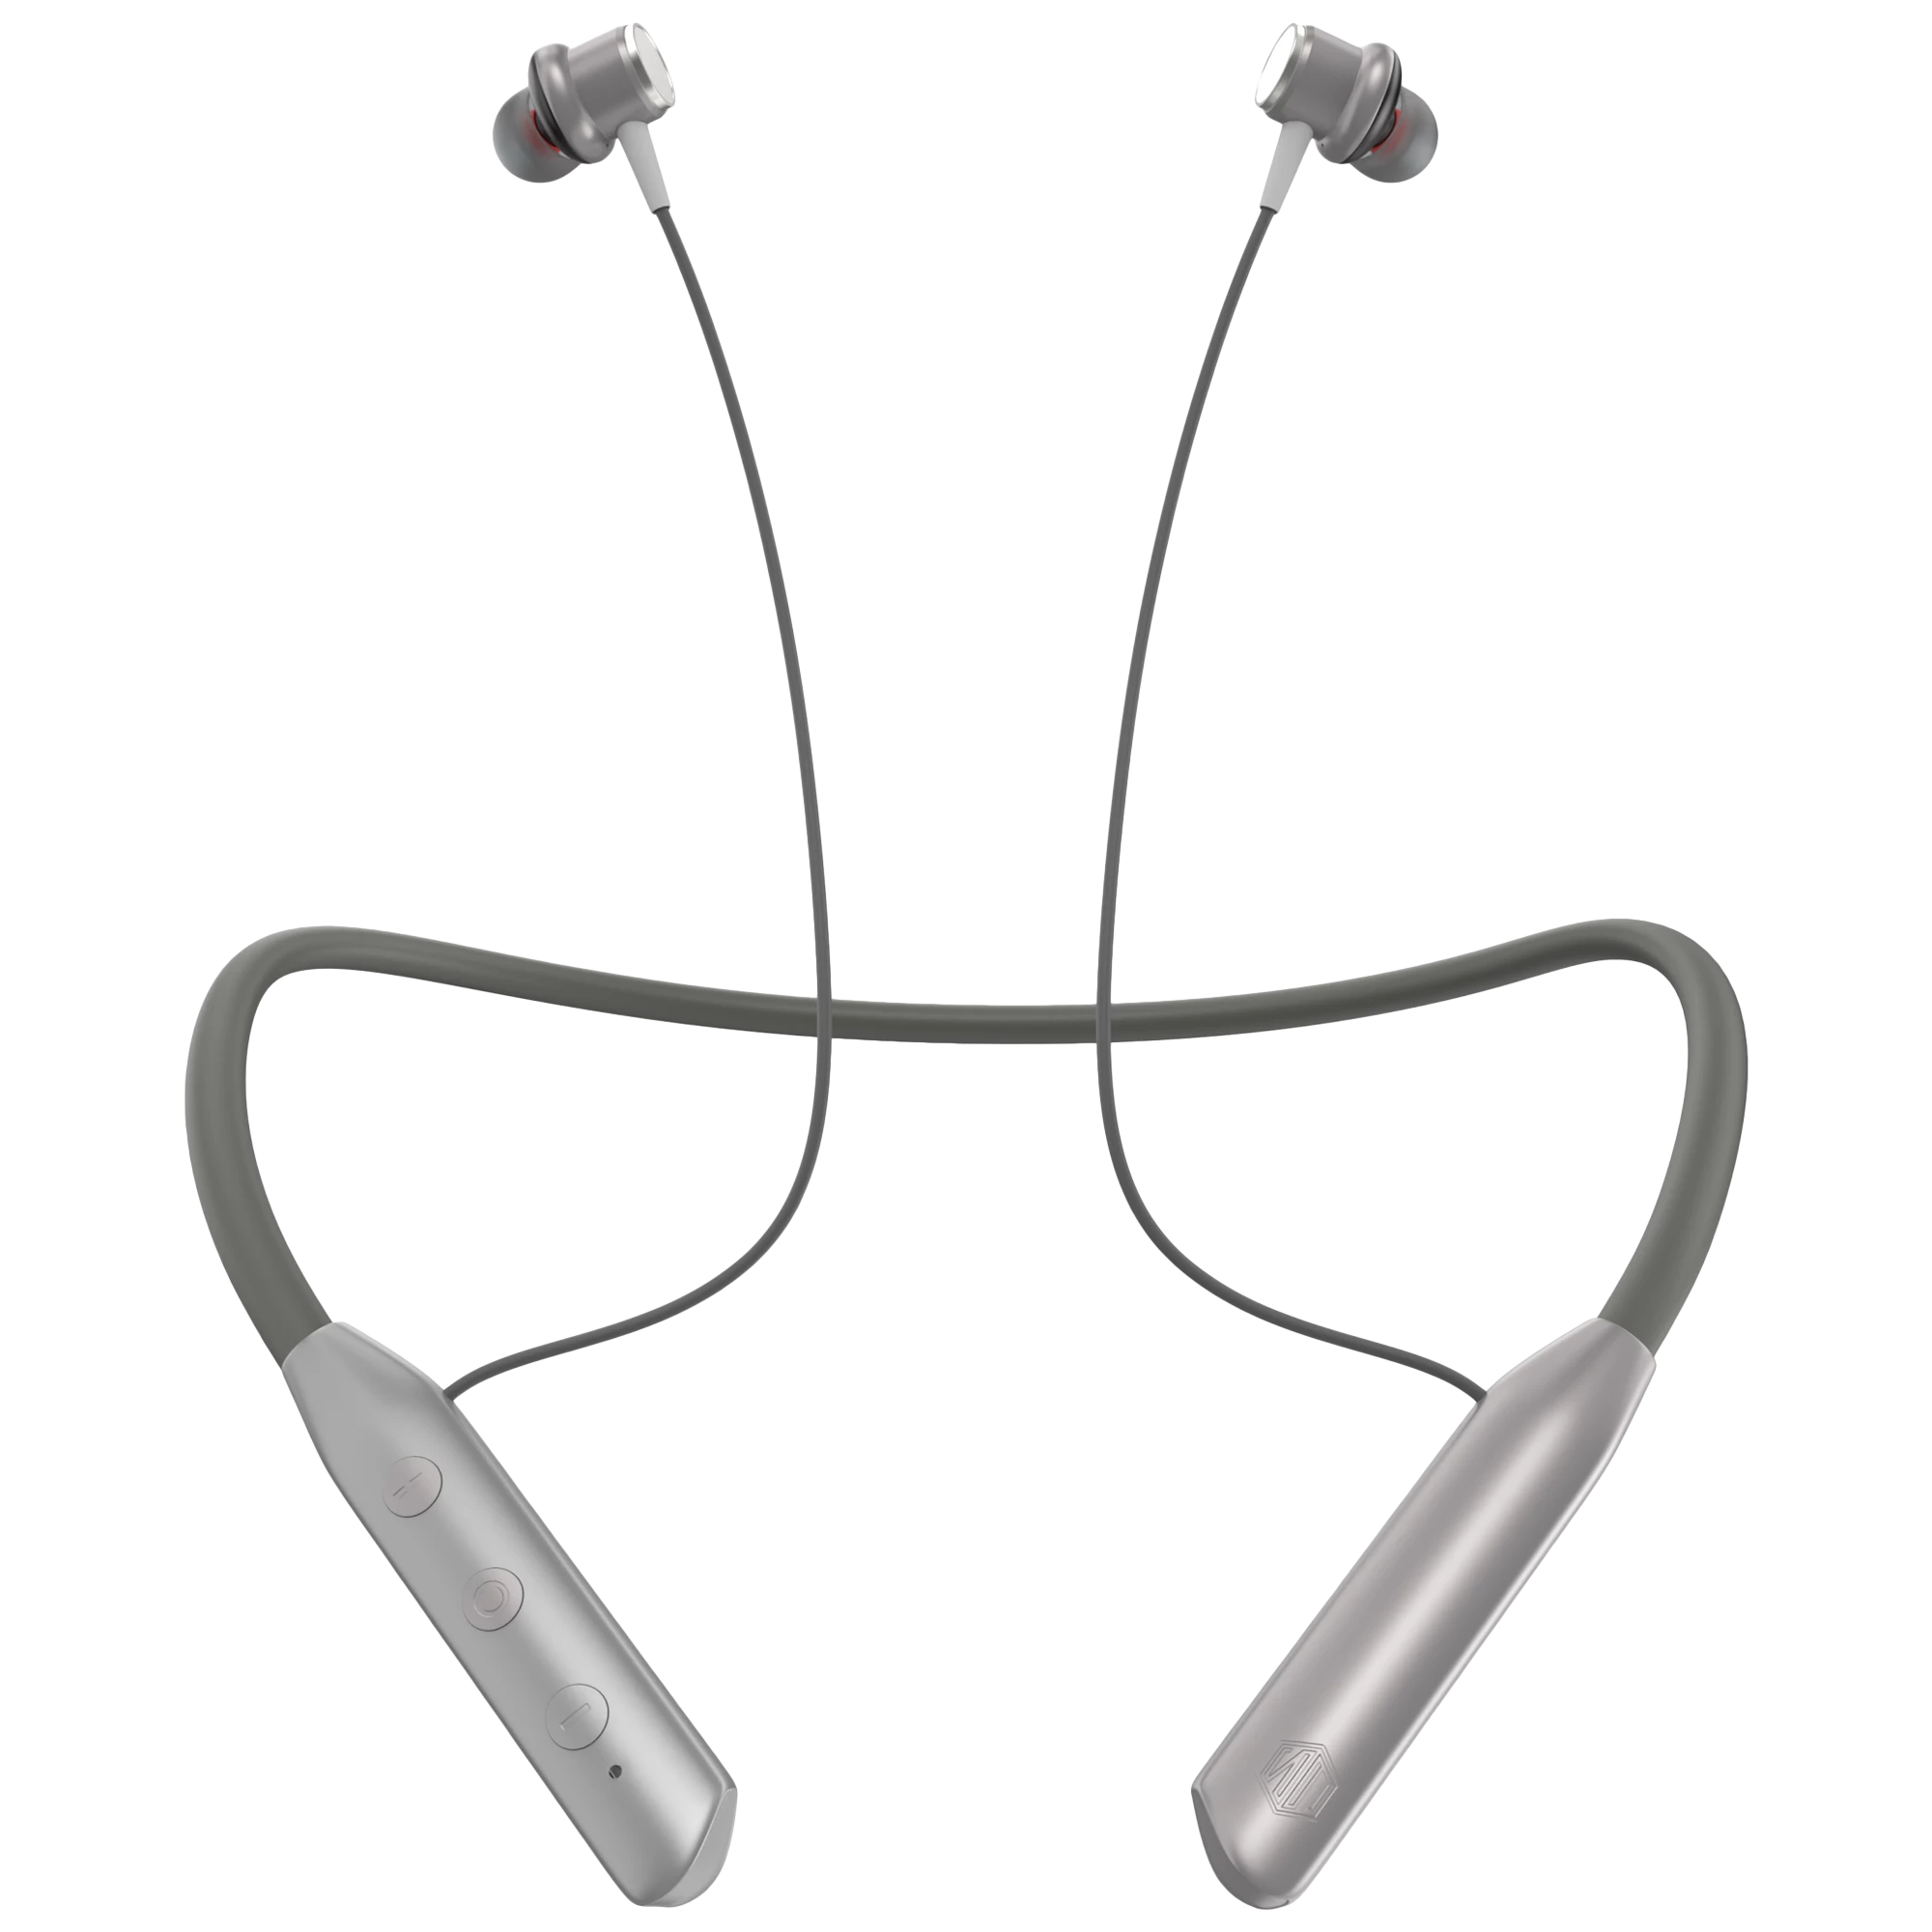 Nu Republic Pulse Metal Neckband with Environmental Noise Cancellation (IPX4 Water Resistant, X-Bass Technology, Silver)